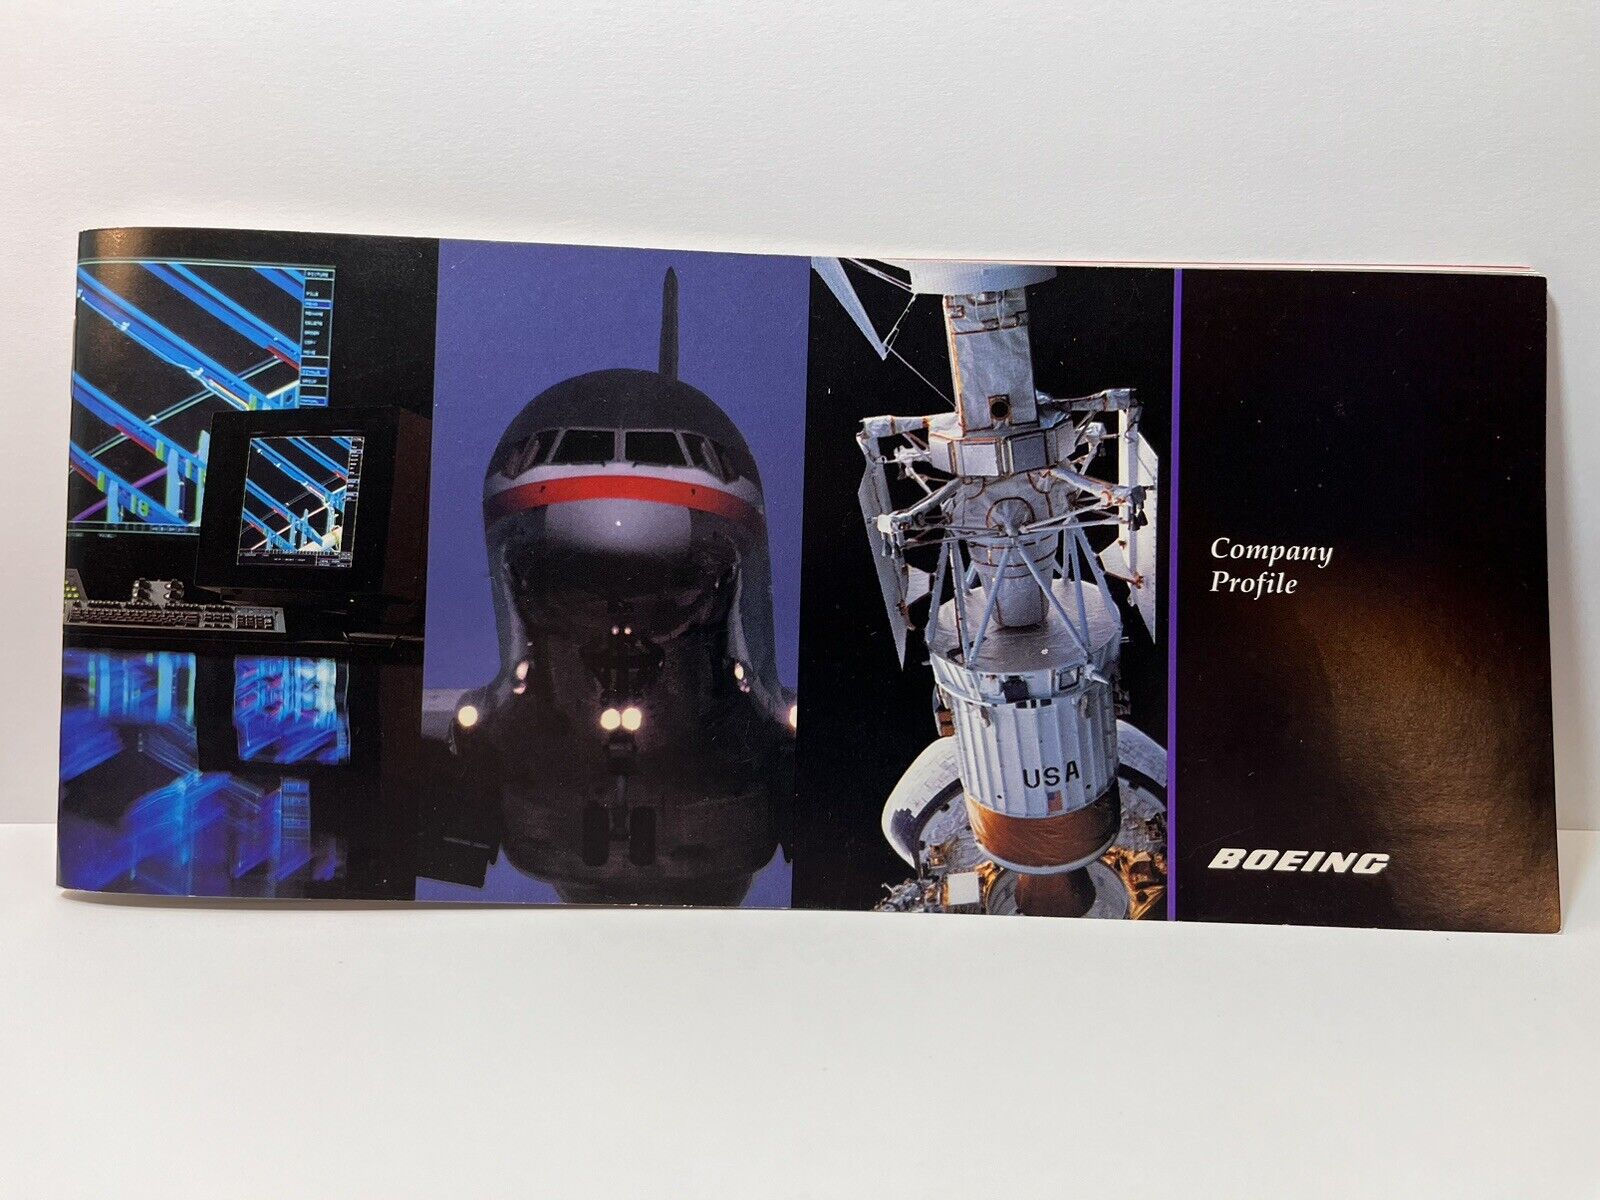 Boeing Company Profile Booklet 1990s Aviation Space